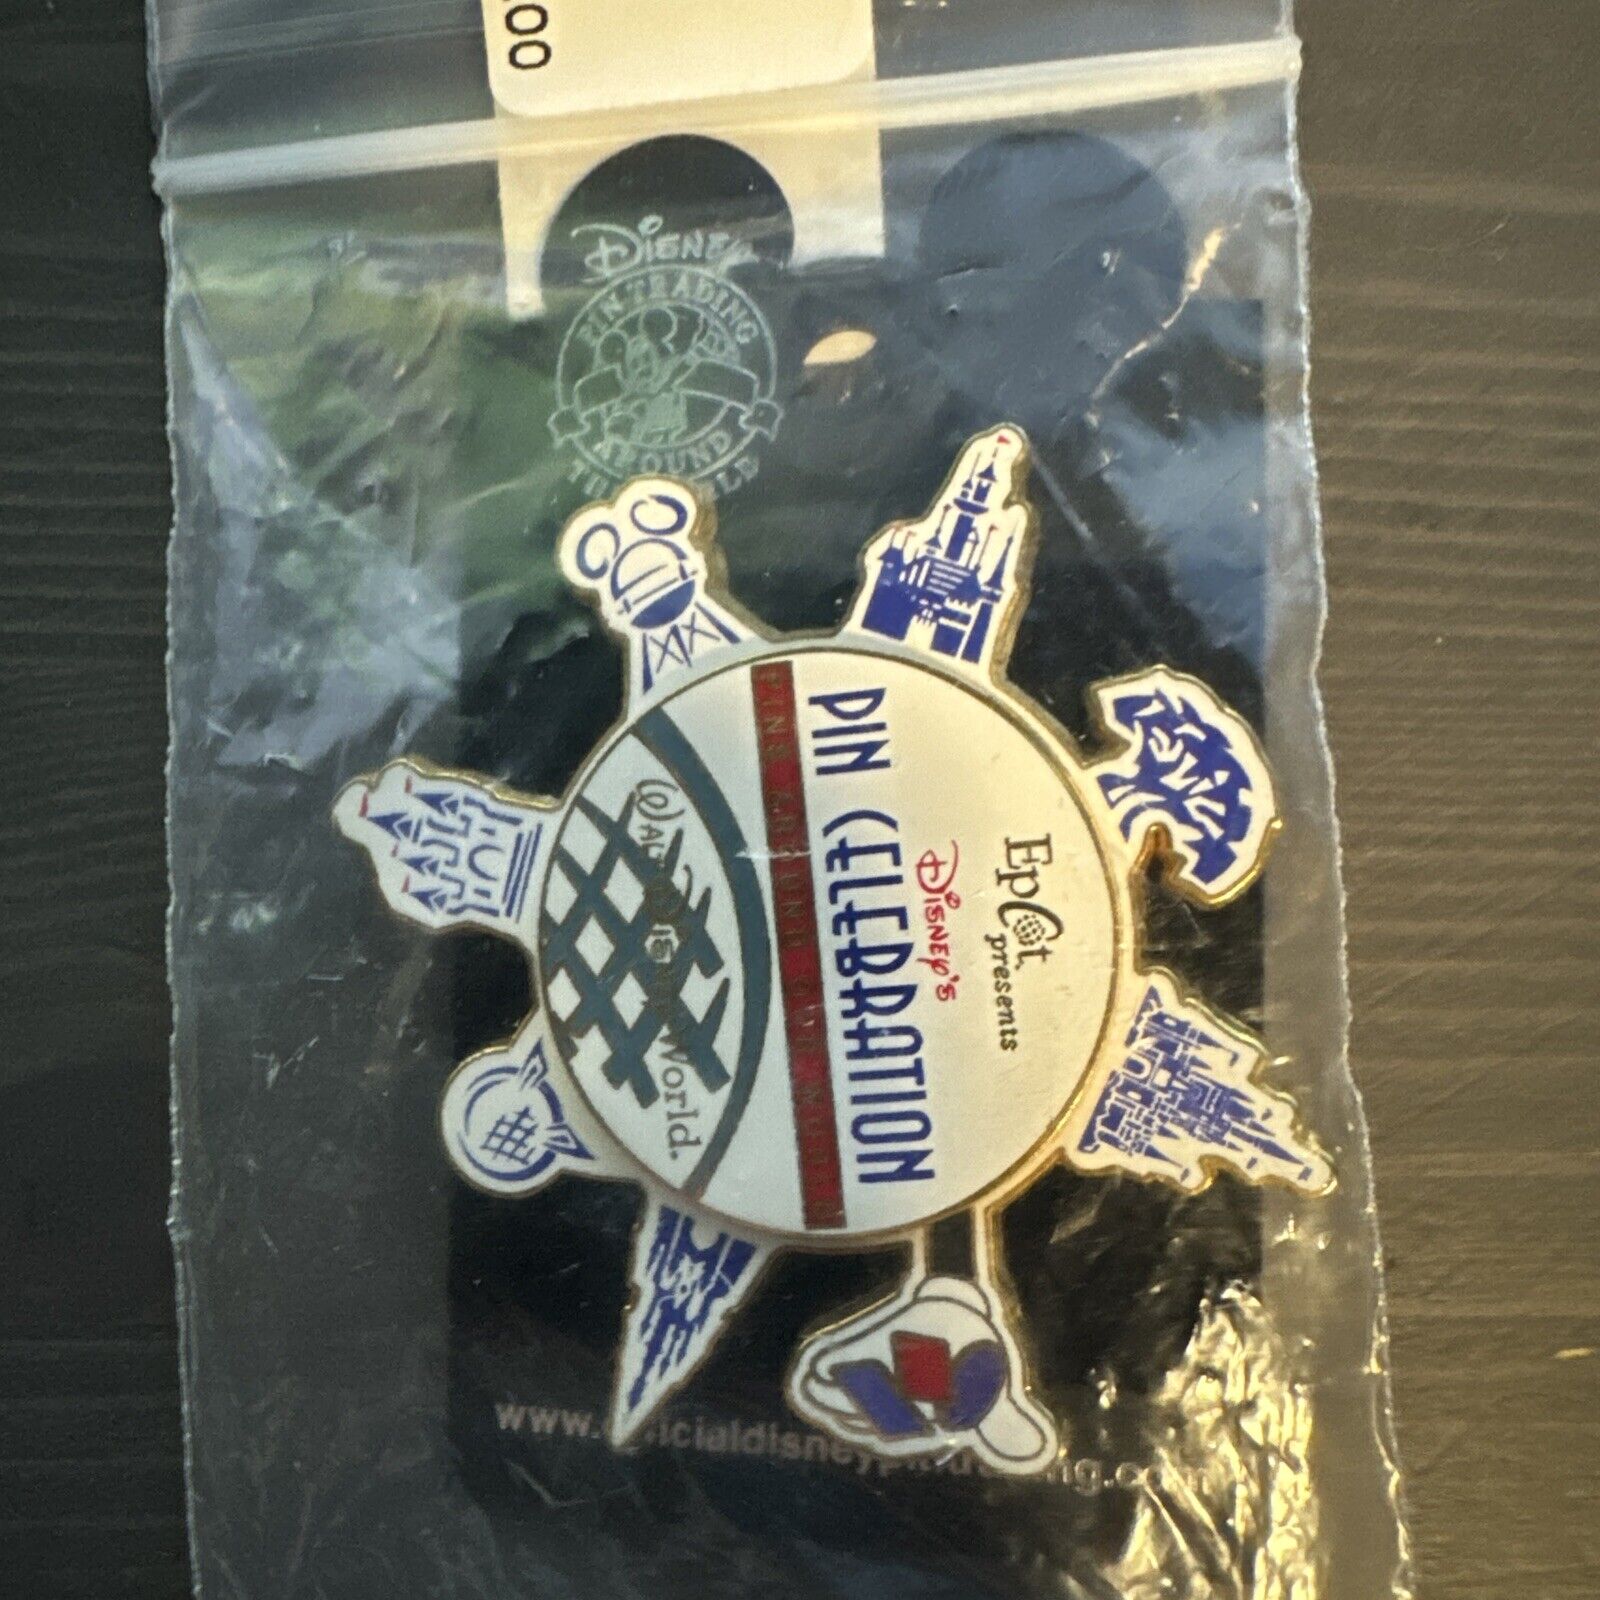 Disney 2001 Epcot Celebration Pins Around the World Spinner Limited Edition